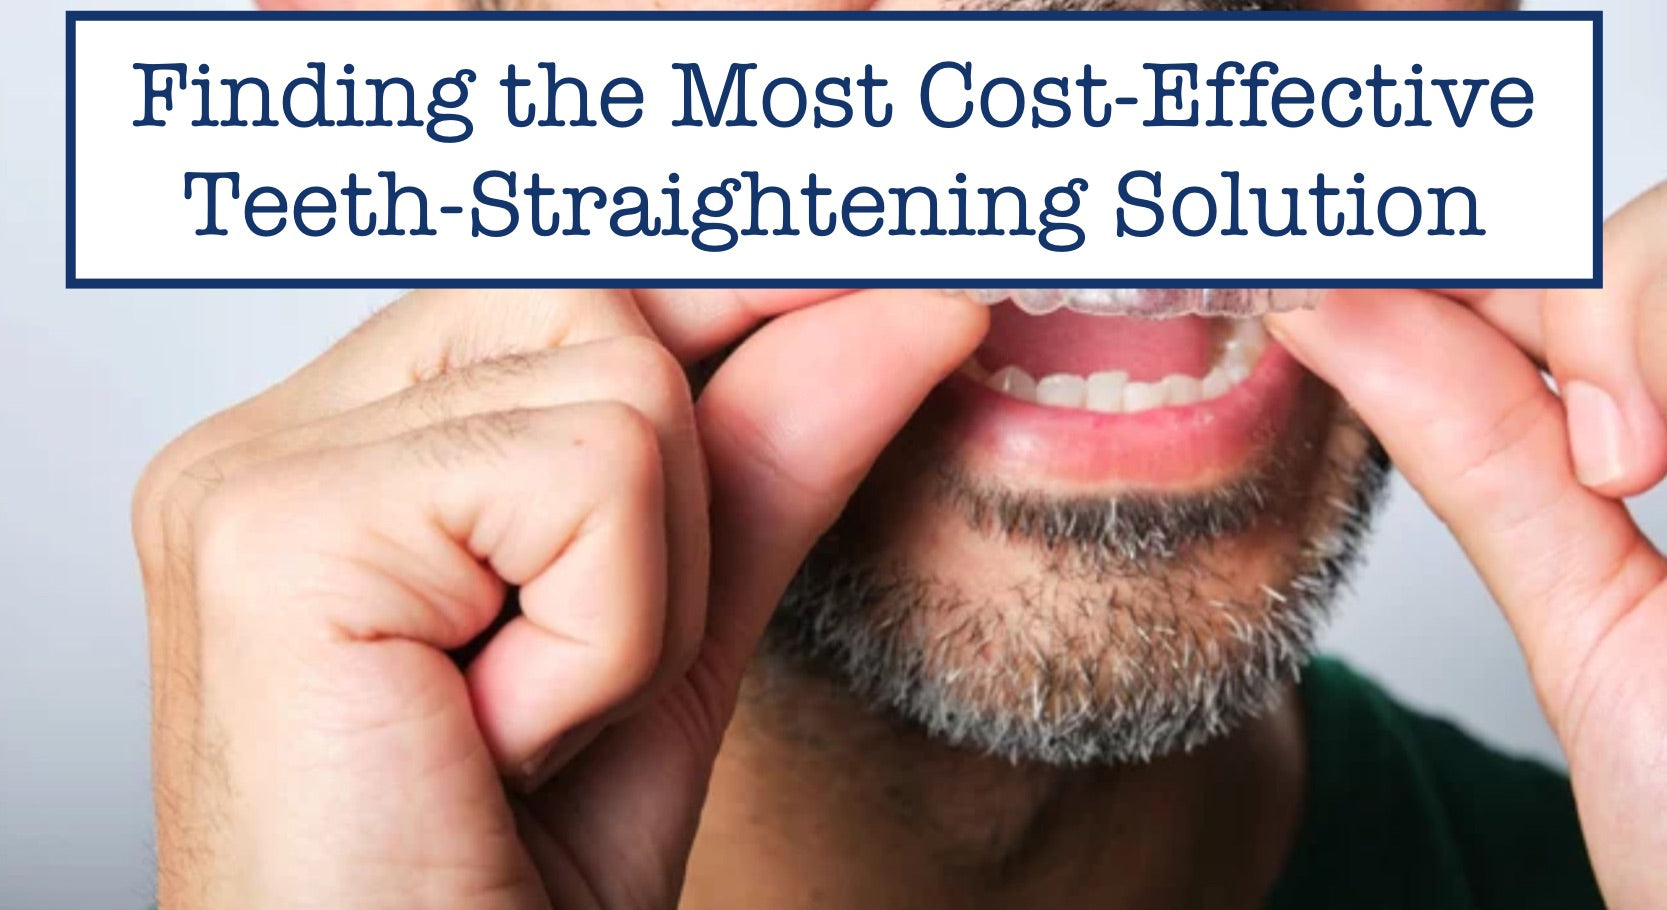 Finding the Most Cost-Effective Teeth-Straightening Solution